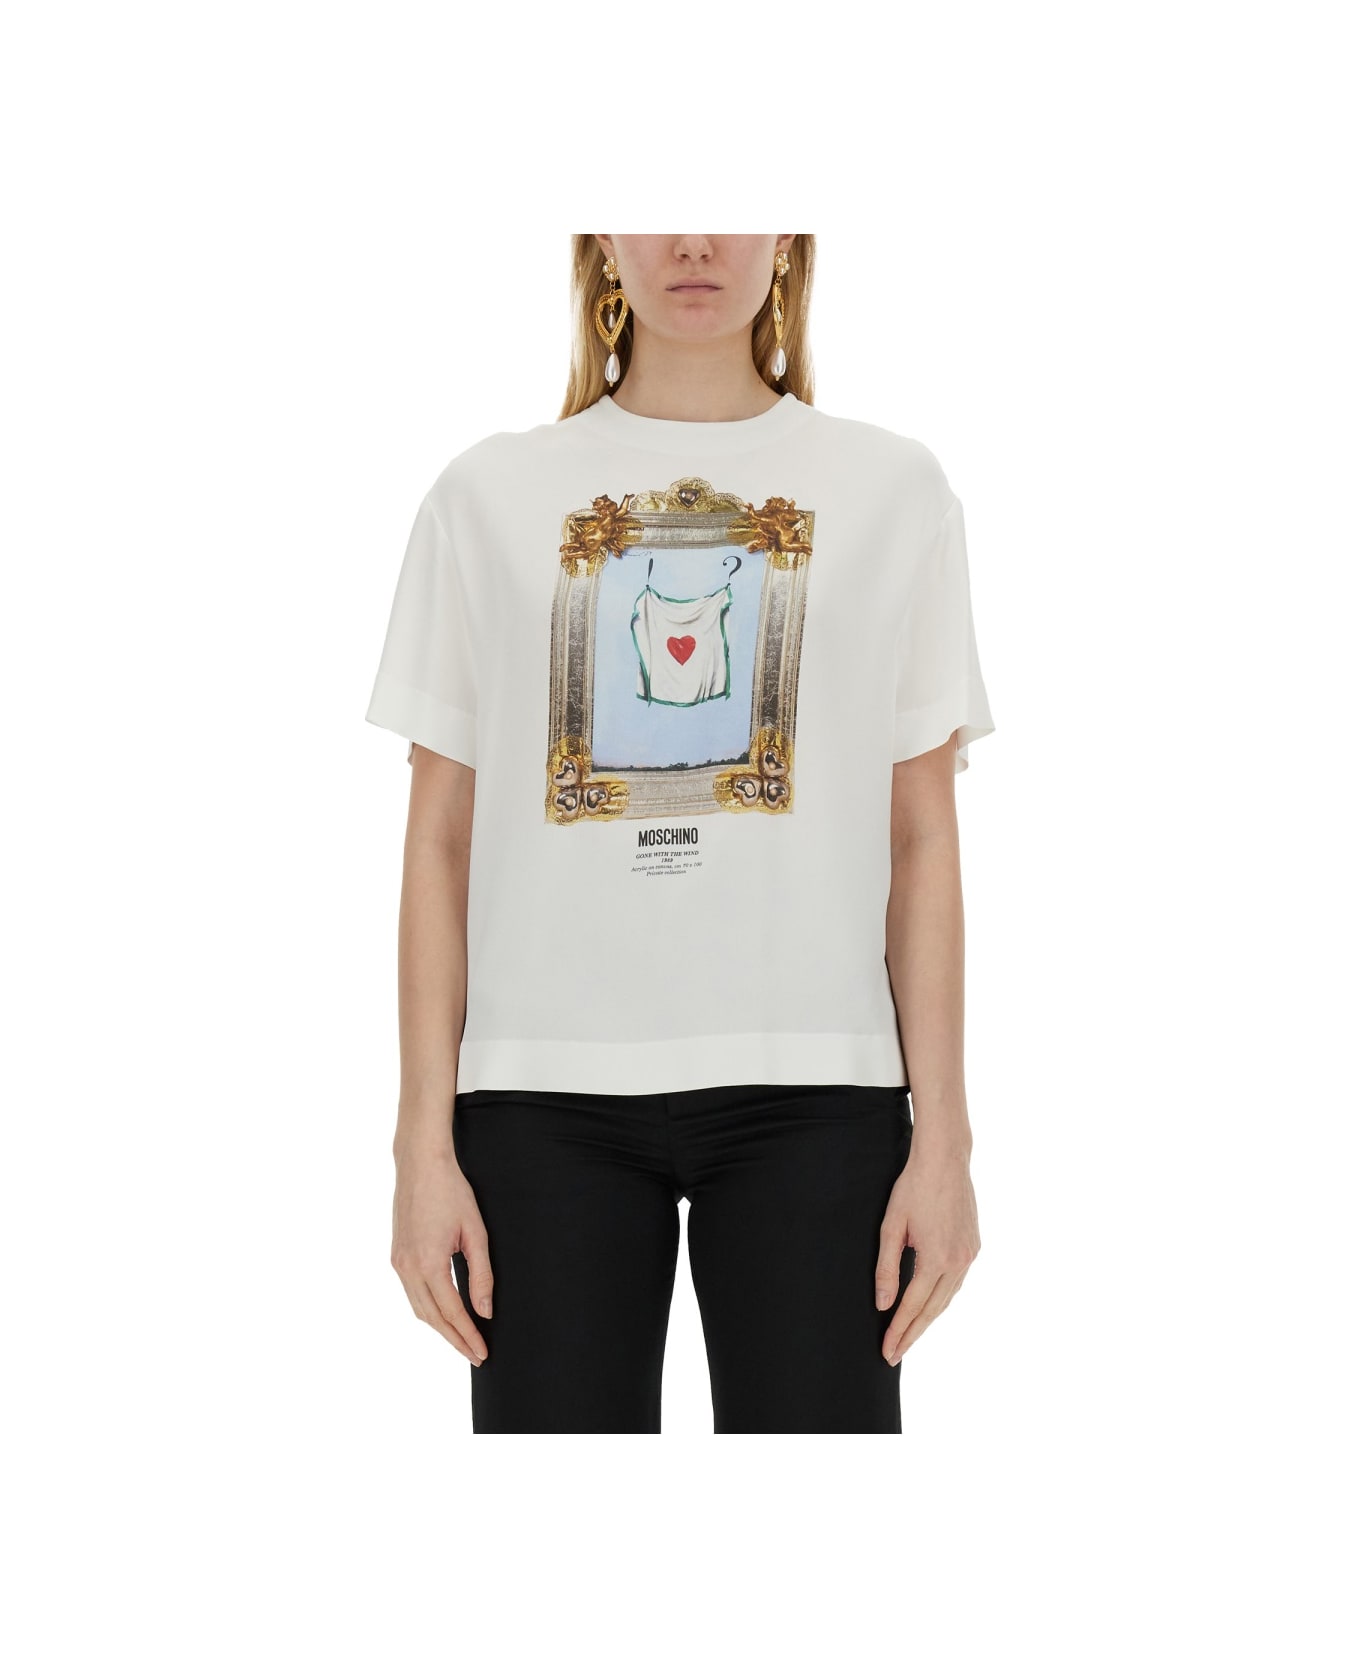 Moschino "gone With The Wind" T-shirt - WHITE Tシャツ